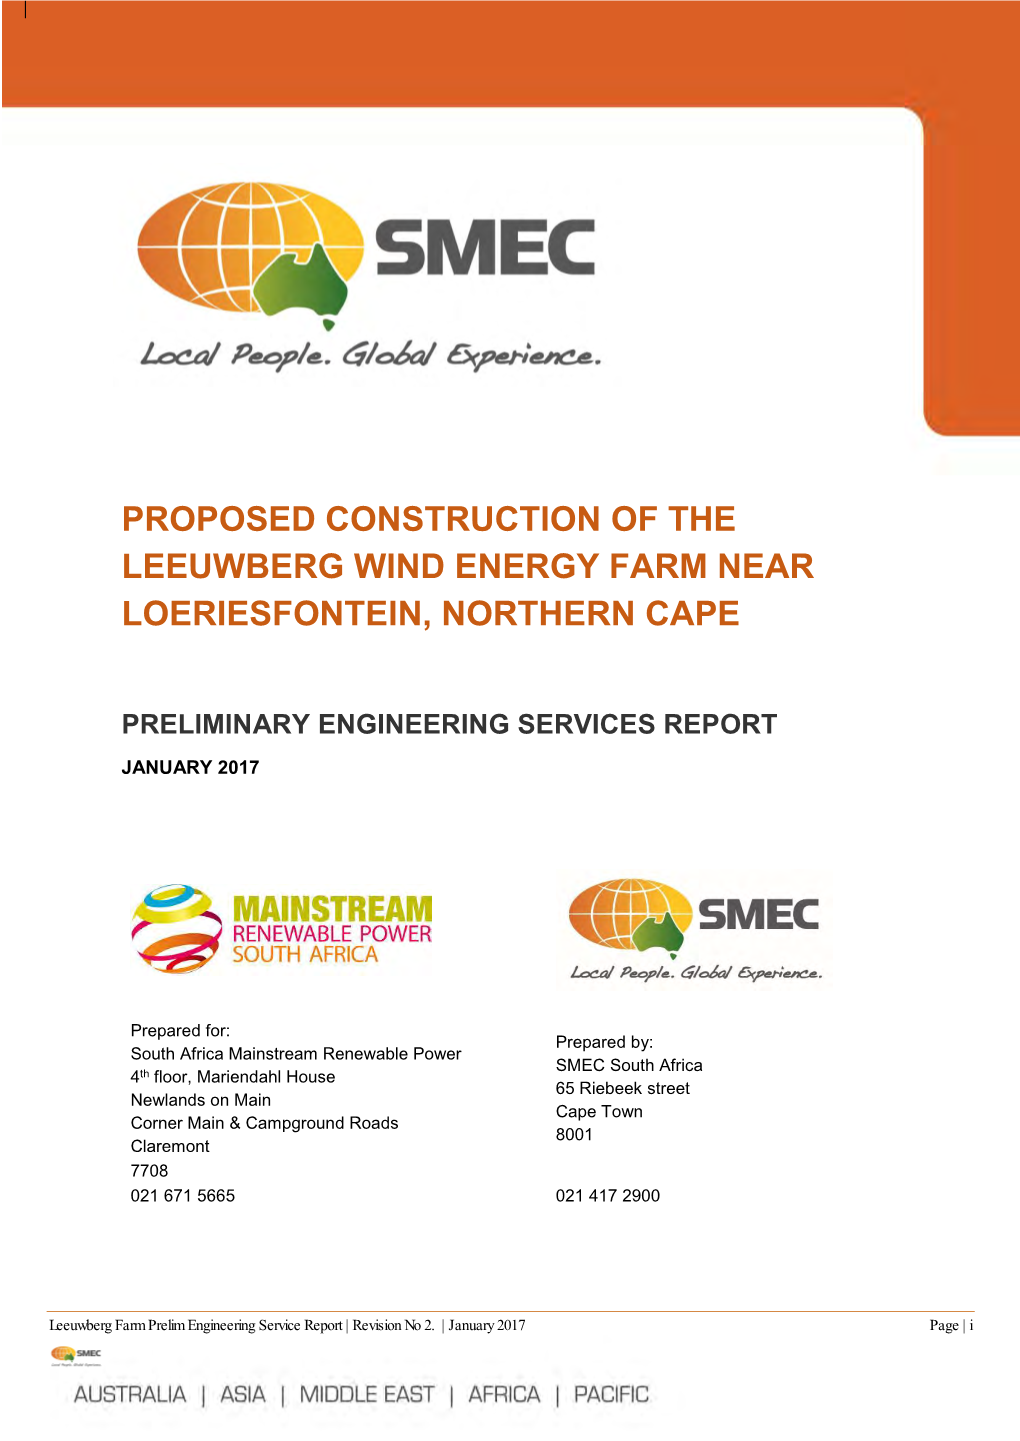 Proposed Construction of the Leeuwberg Wind Energy Farm Near Loeriesfontein, Northern Cape